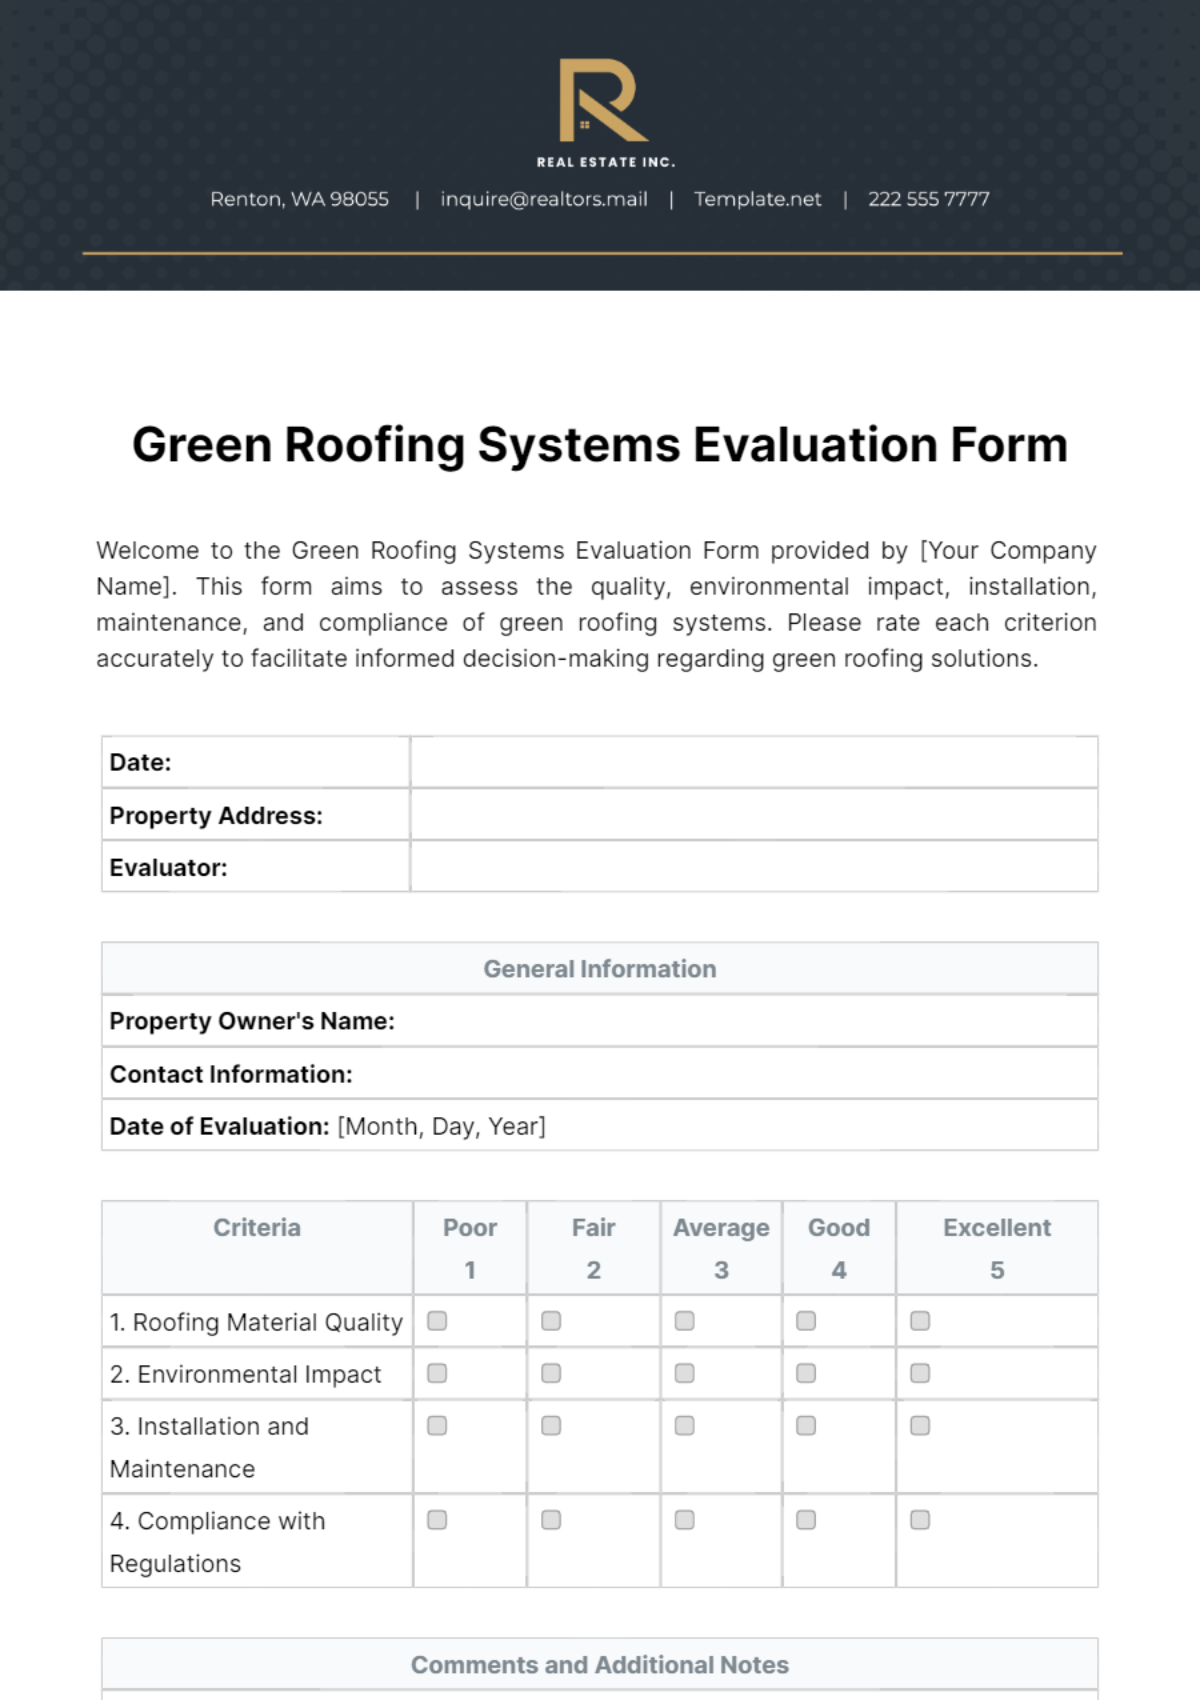 Real Estate Green Roofing Systems Evaluation Form Template